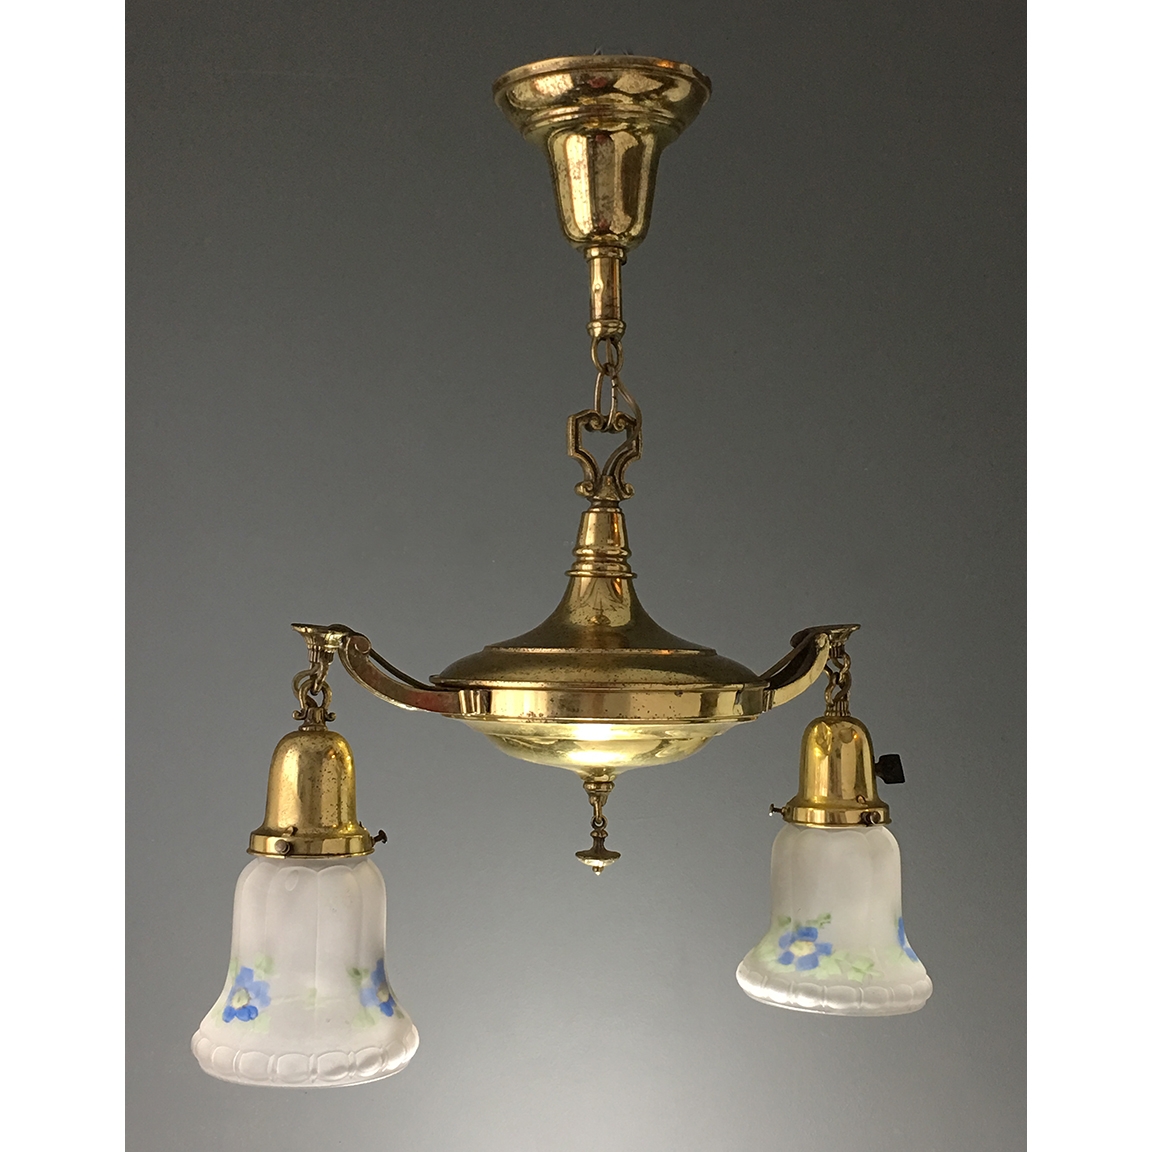 Permalink to Vintage Brass Ceiling Light Fixture